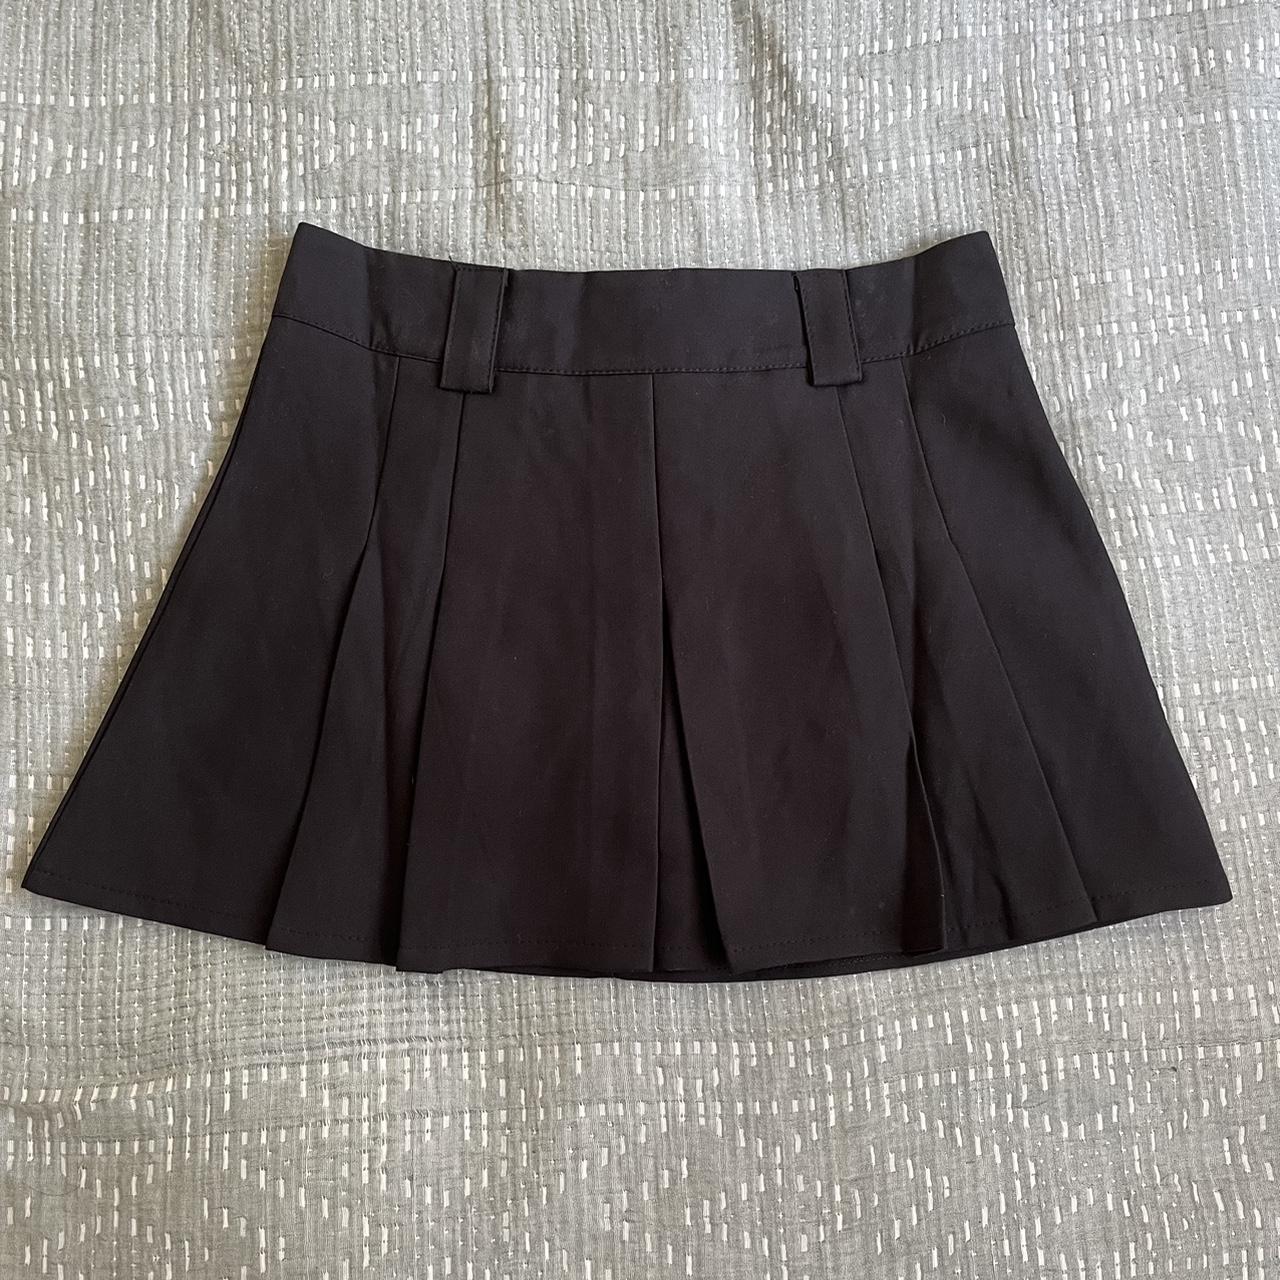 Cute pleated mini skirt from cheep- size S. Fits a... - Depop